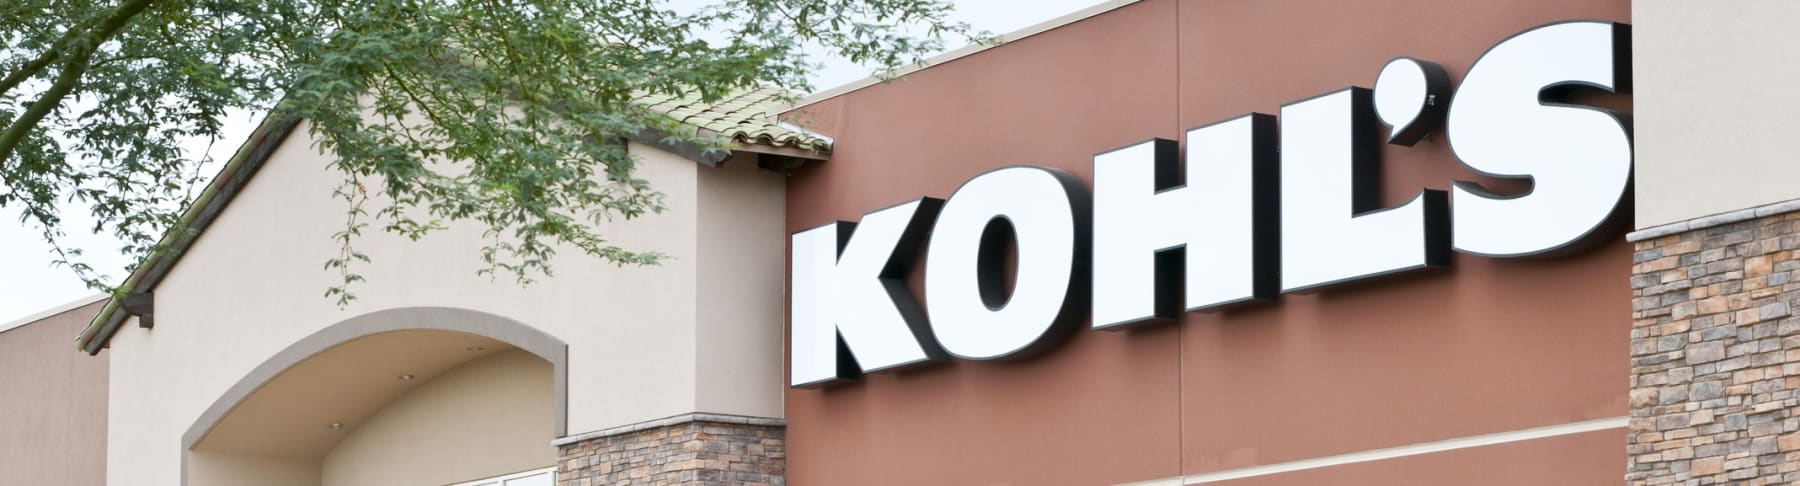 Kohl's sign displayed on exterior of store.